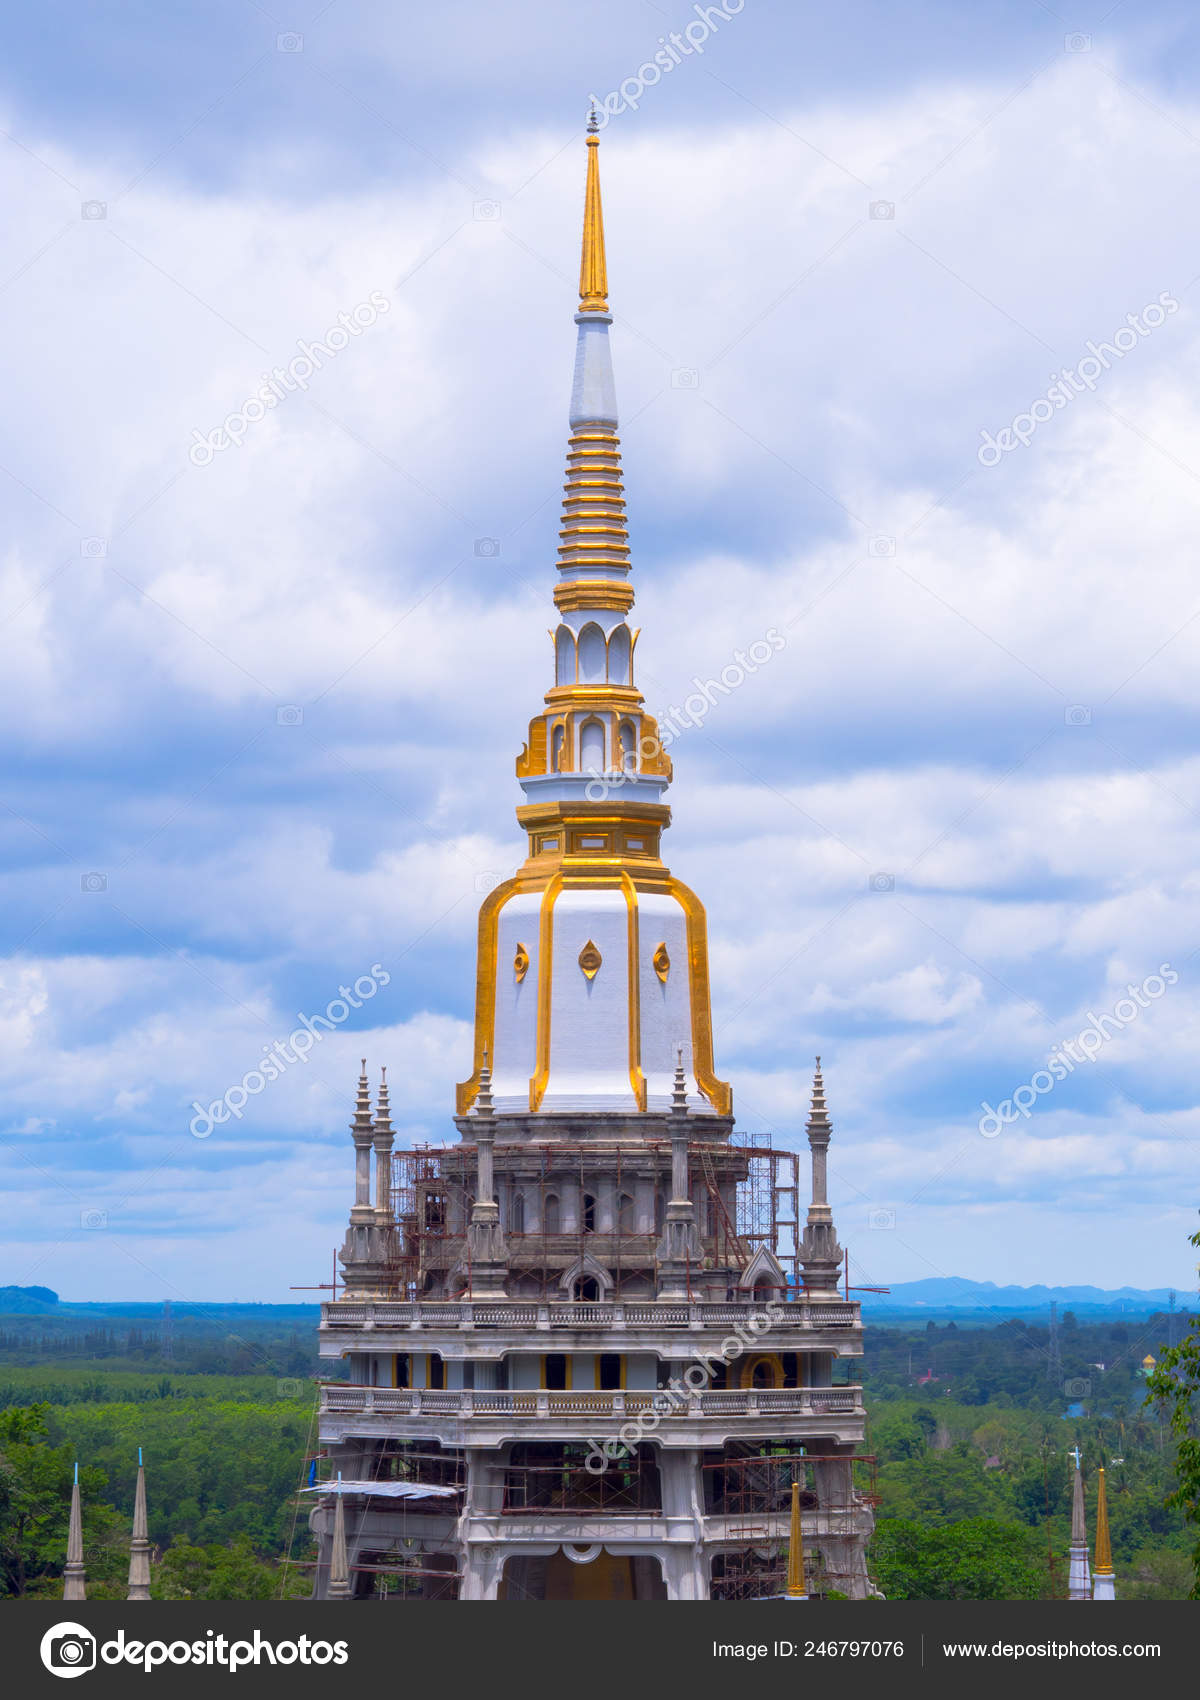 Old Pagoda Sculpture Tiger Cave Temple Construction Blue Sky Clouds Stock Photo C Supawitsre 246797076